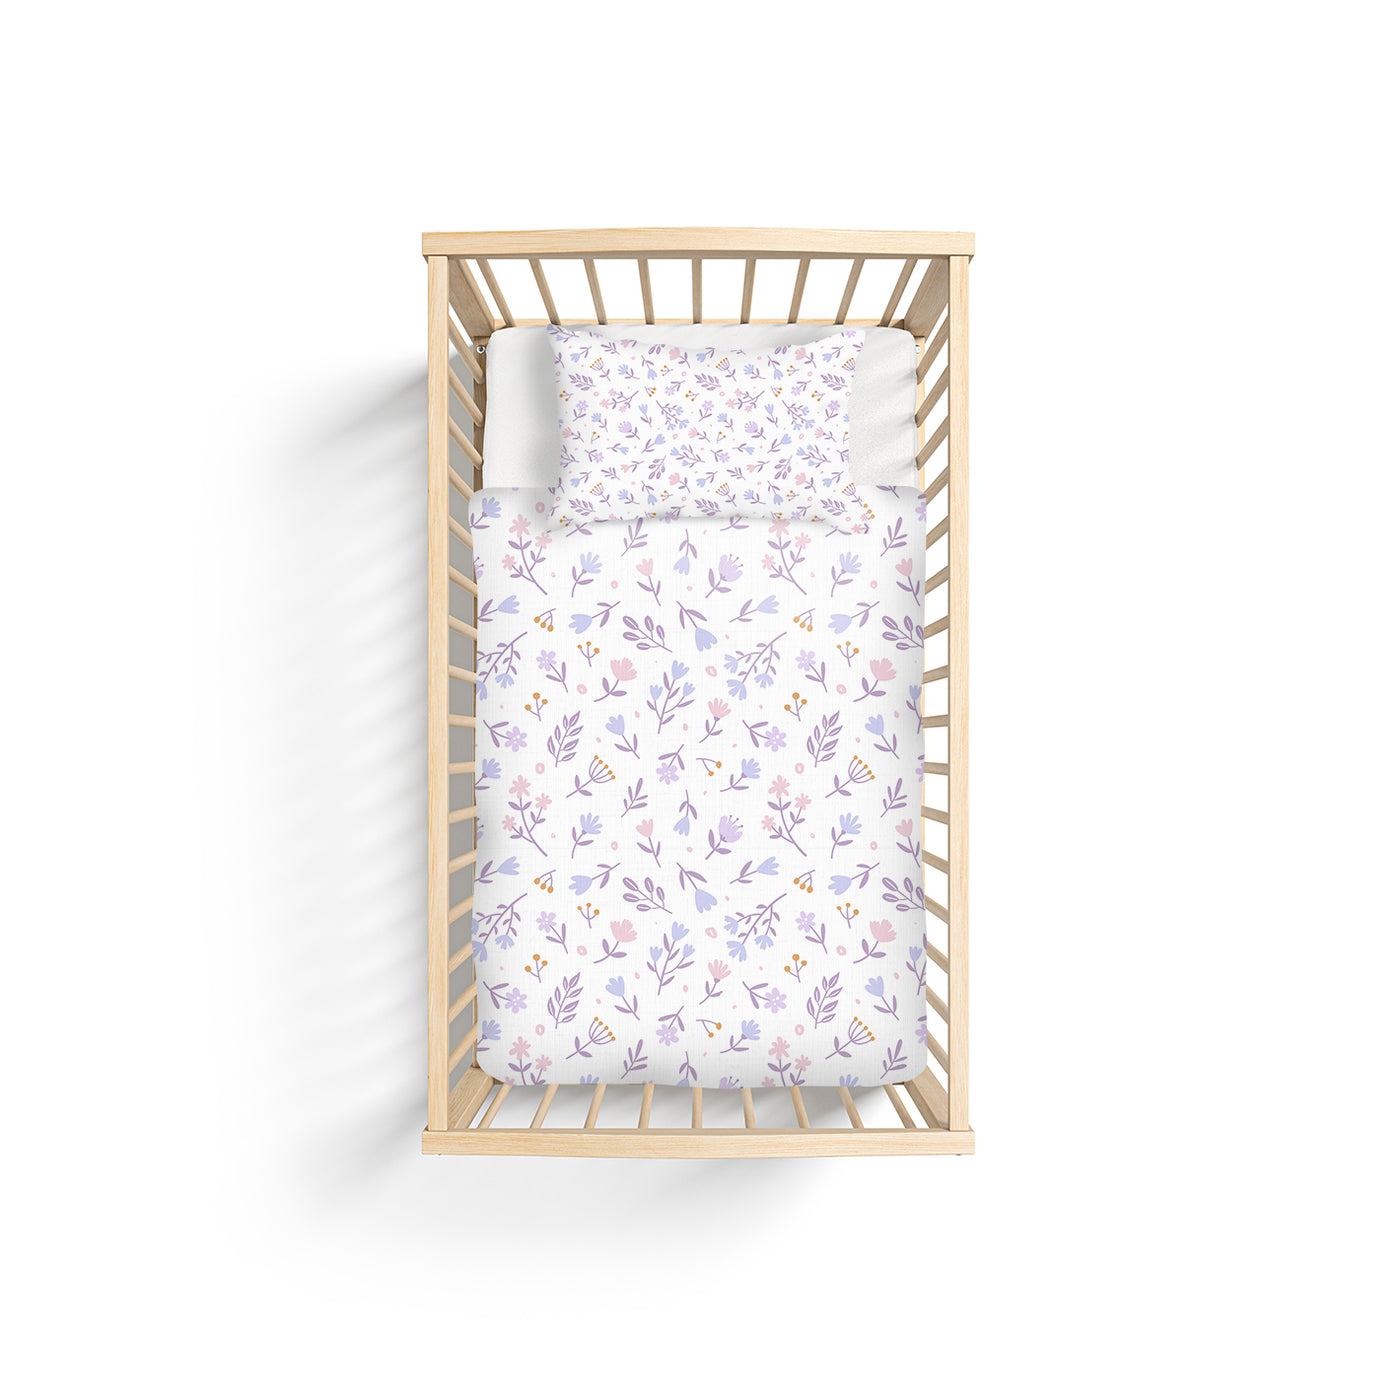 BABY DUVET COVER SET - Pink Illustrated Flowers